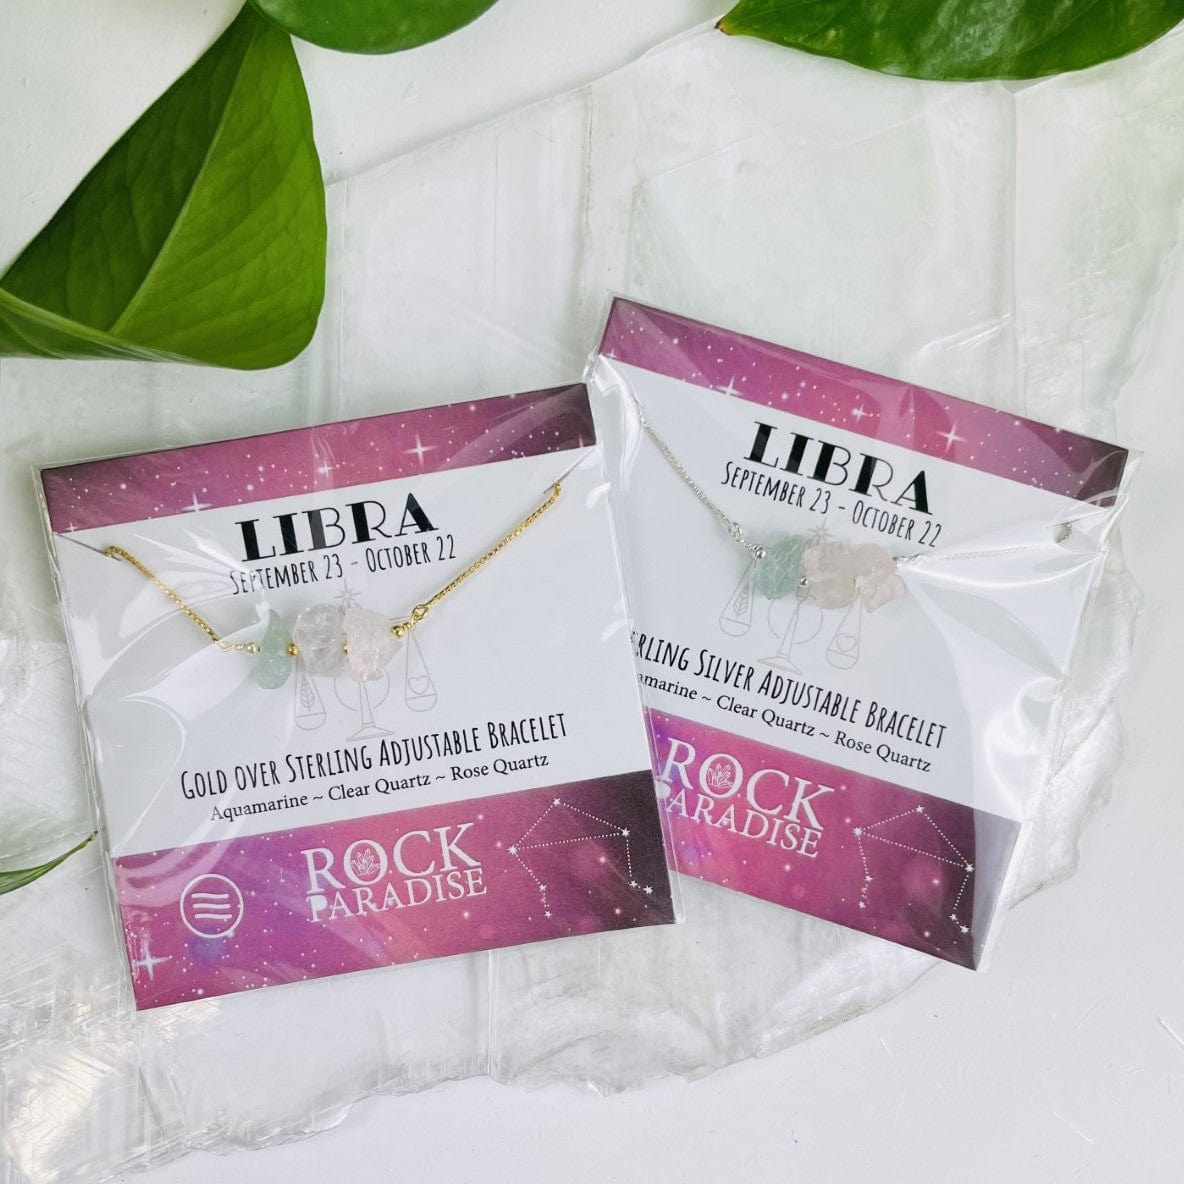 Libra Bracelets with 3 Stones for your Zodiac Sign - Gold over Sterling or Sterling Silver Adjustable Length in their packaging